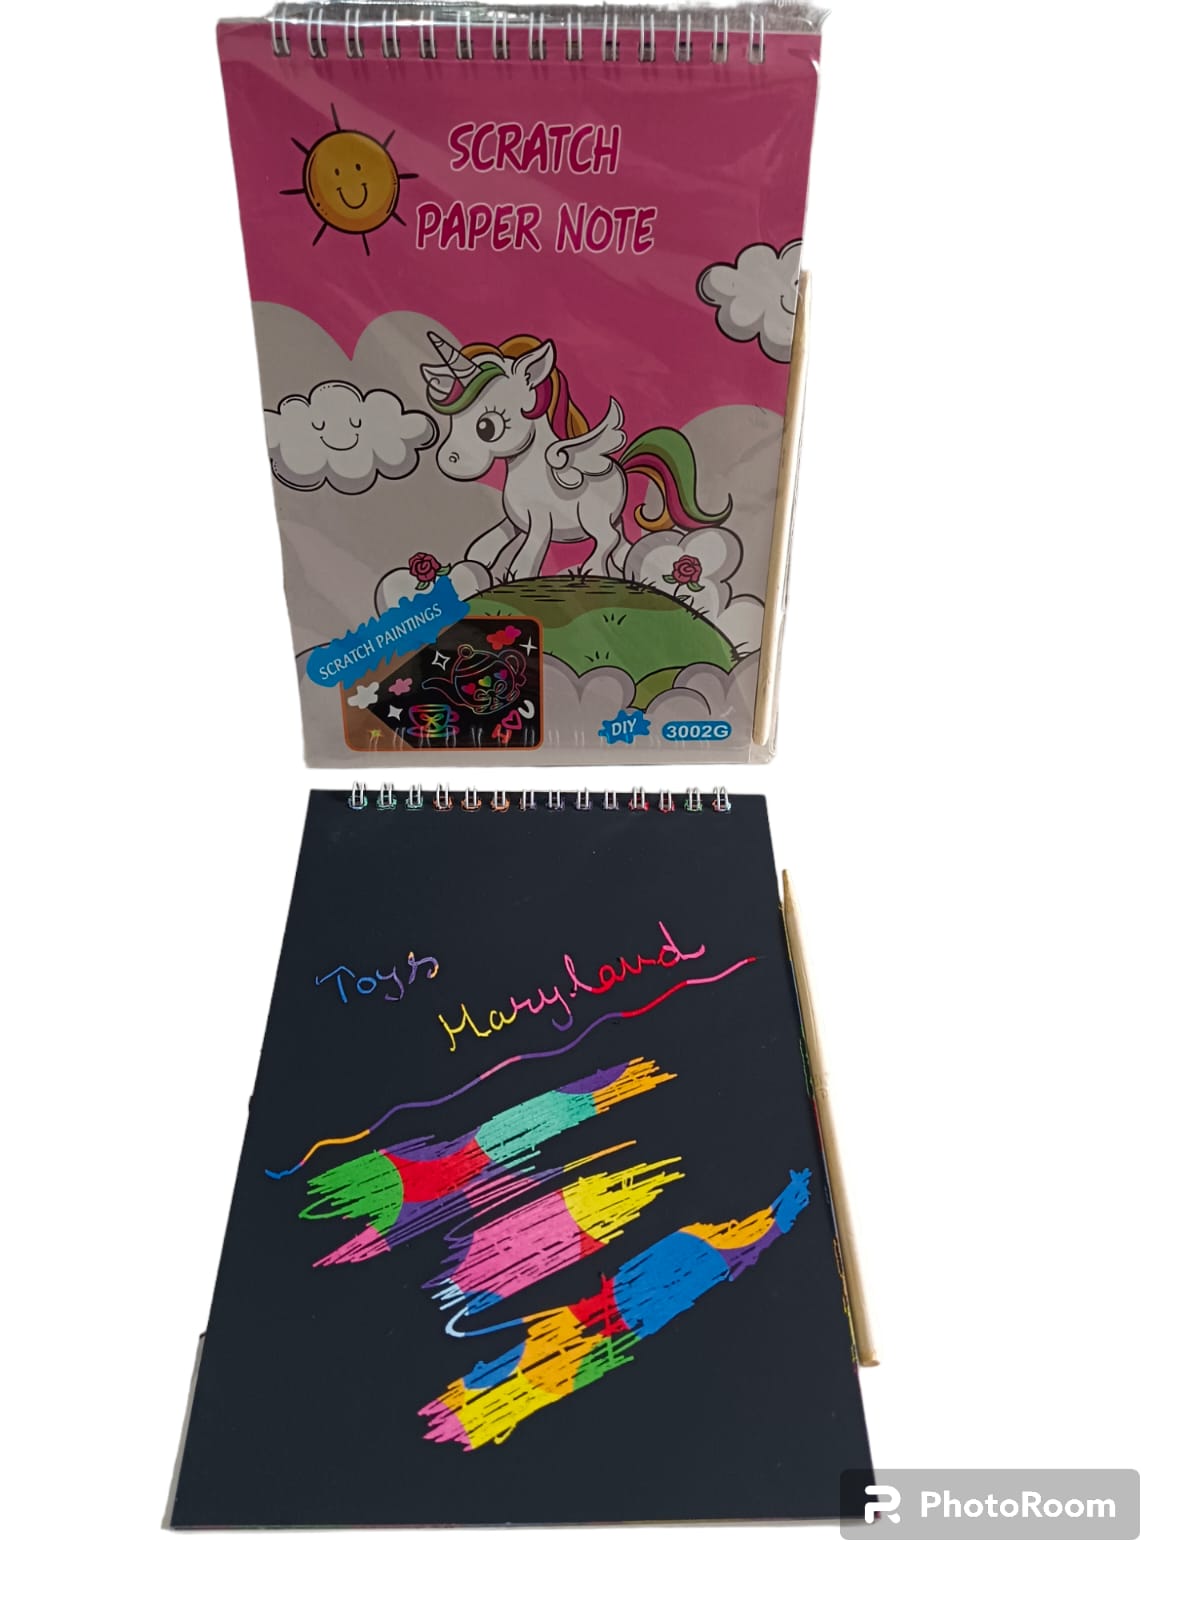 Unicorn Cartoon Printed 2 Pack Scratch Paper Note, DIY Art Book with Wooden Stylus Scratching Tool for Kids, Girls, Boys